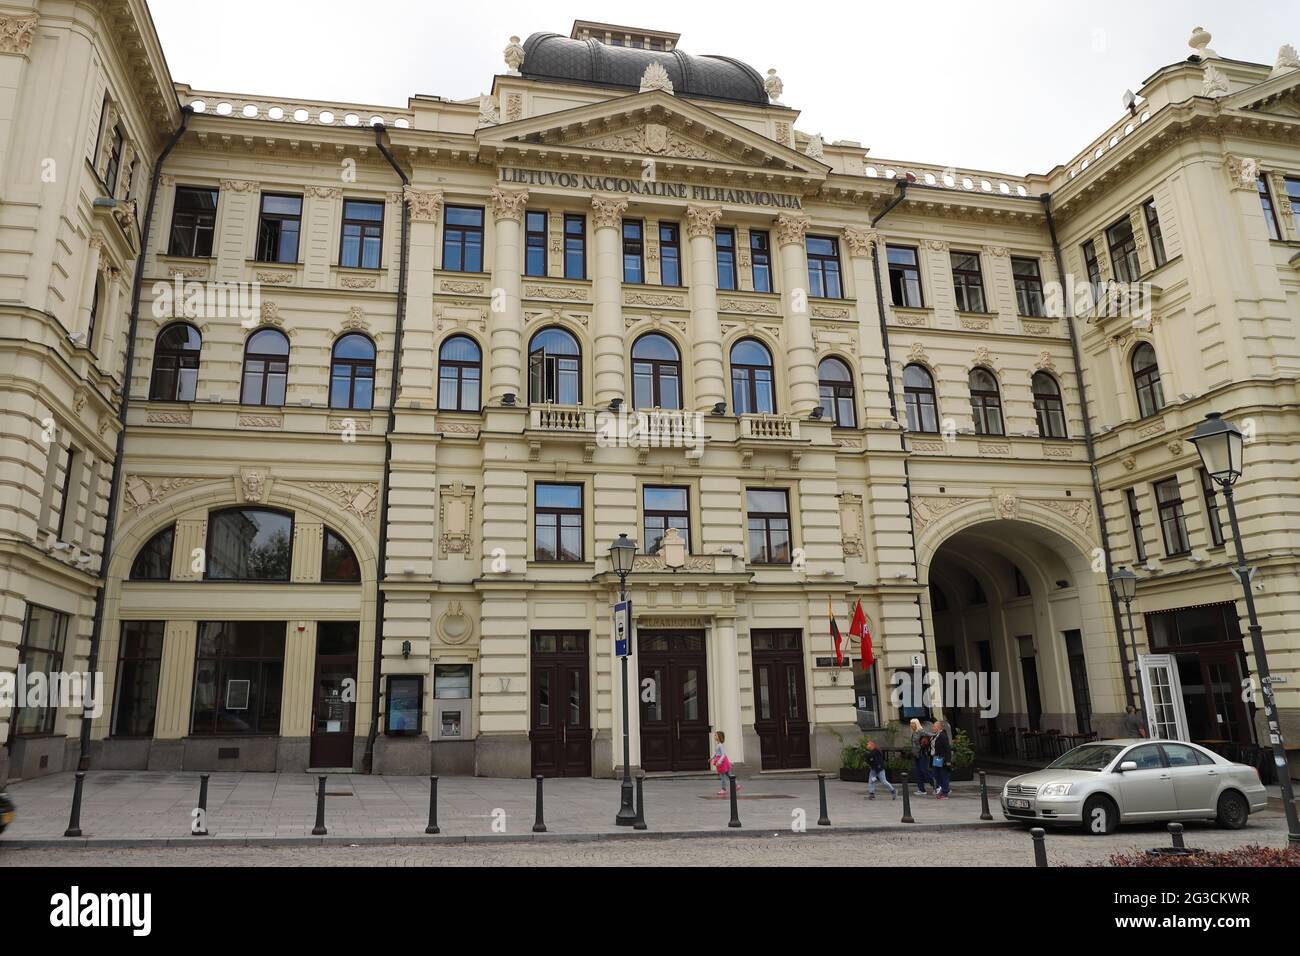 LITHUANIA, VILNIUS - JULY 03, 2018:  Headquarters of the Lithuanian National Philharmonic Society of Vilnius Stock Photo